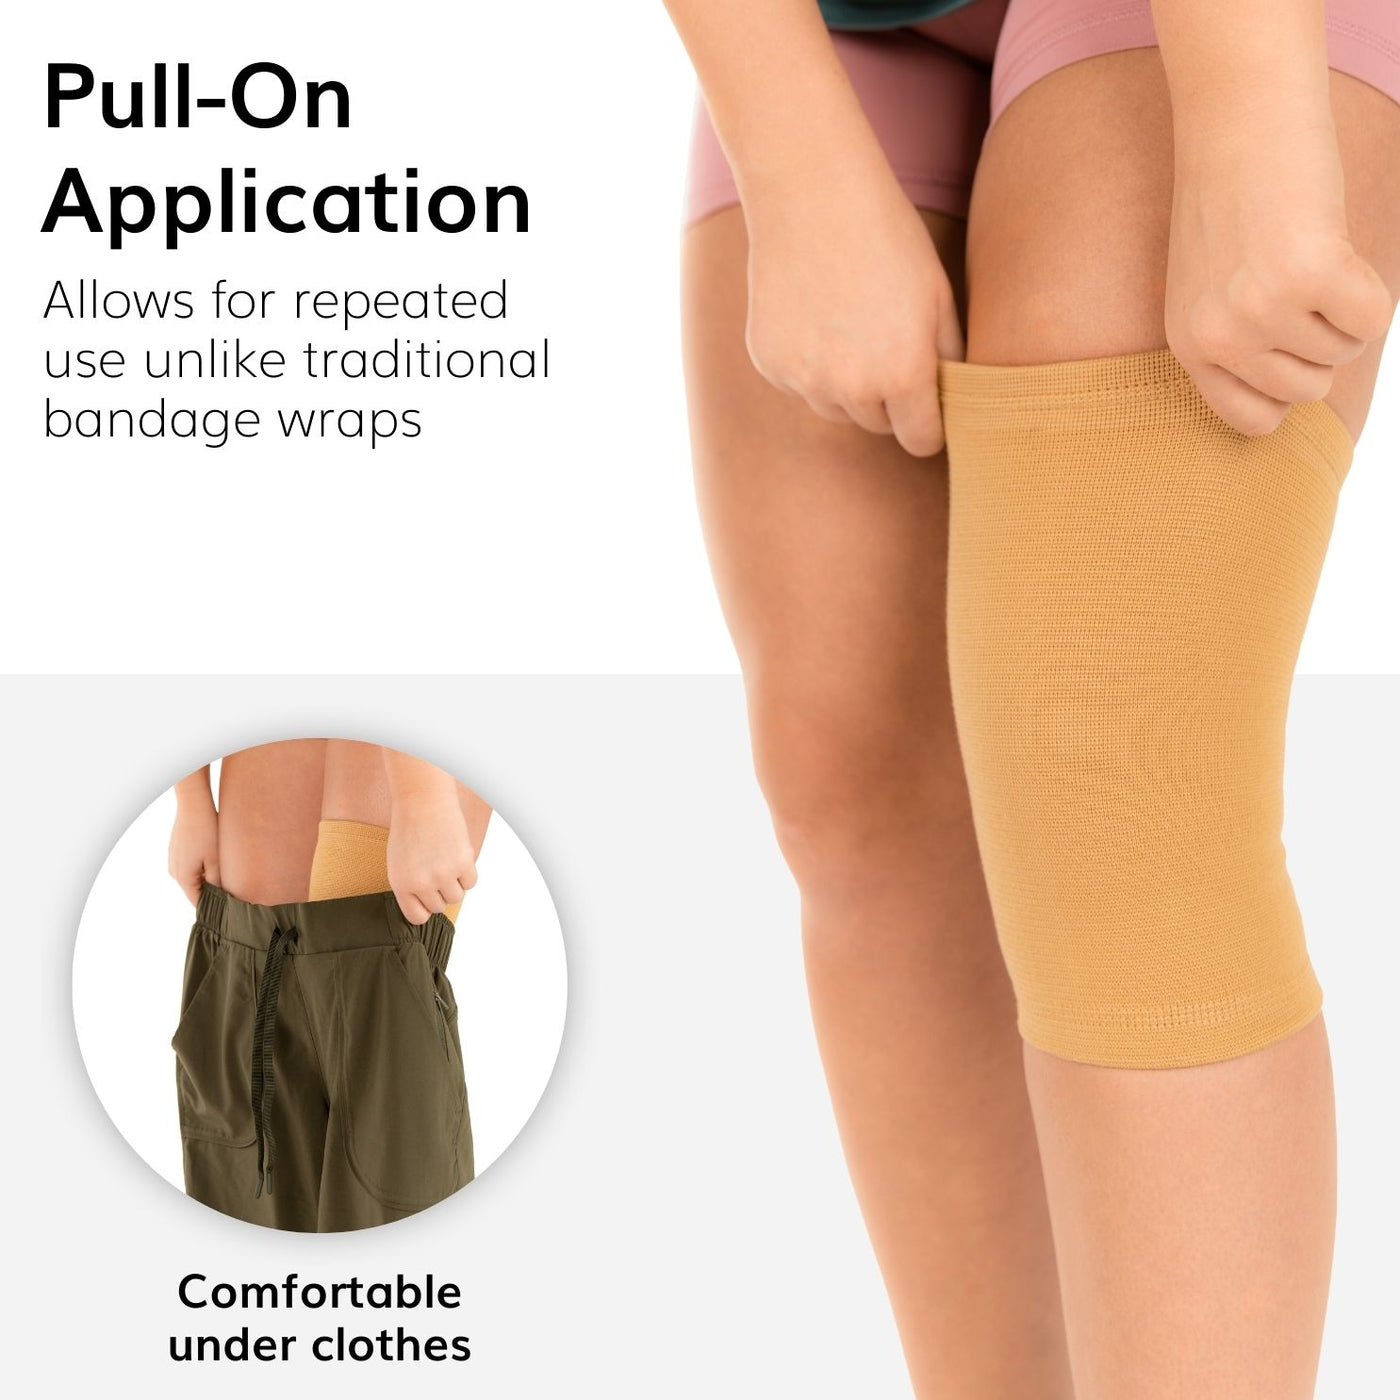 The elastic knee sleeve allows for repeated use unlike traditional wraps